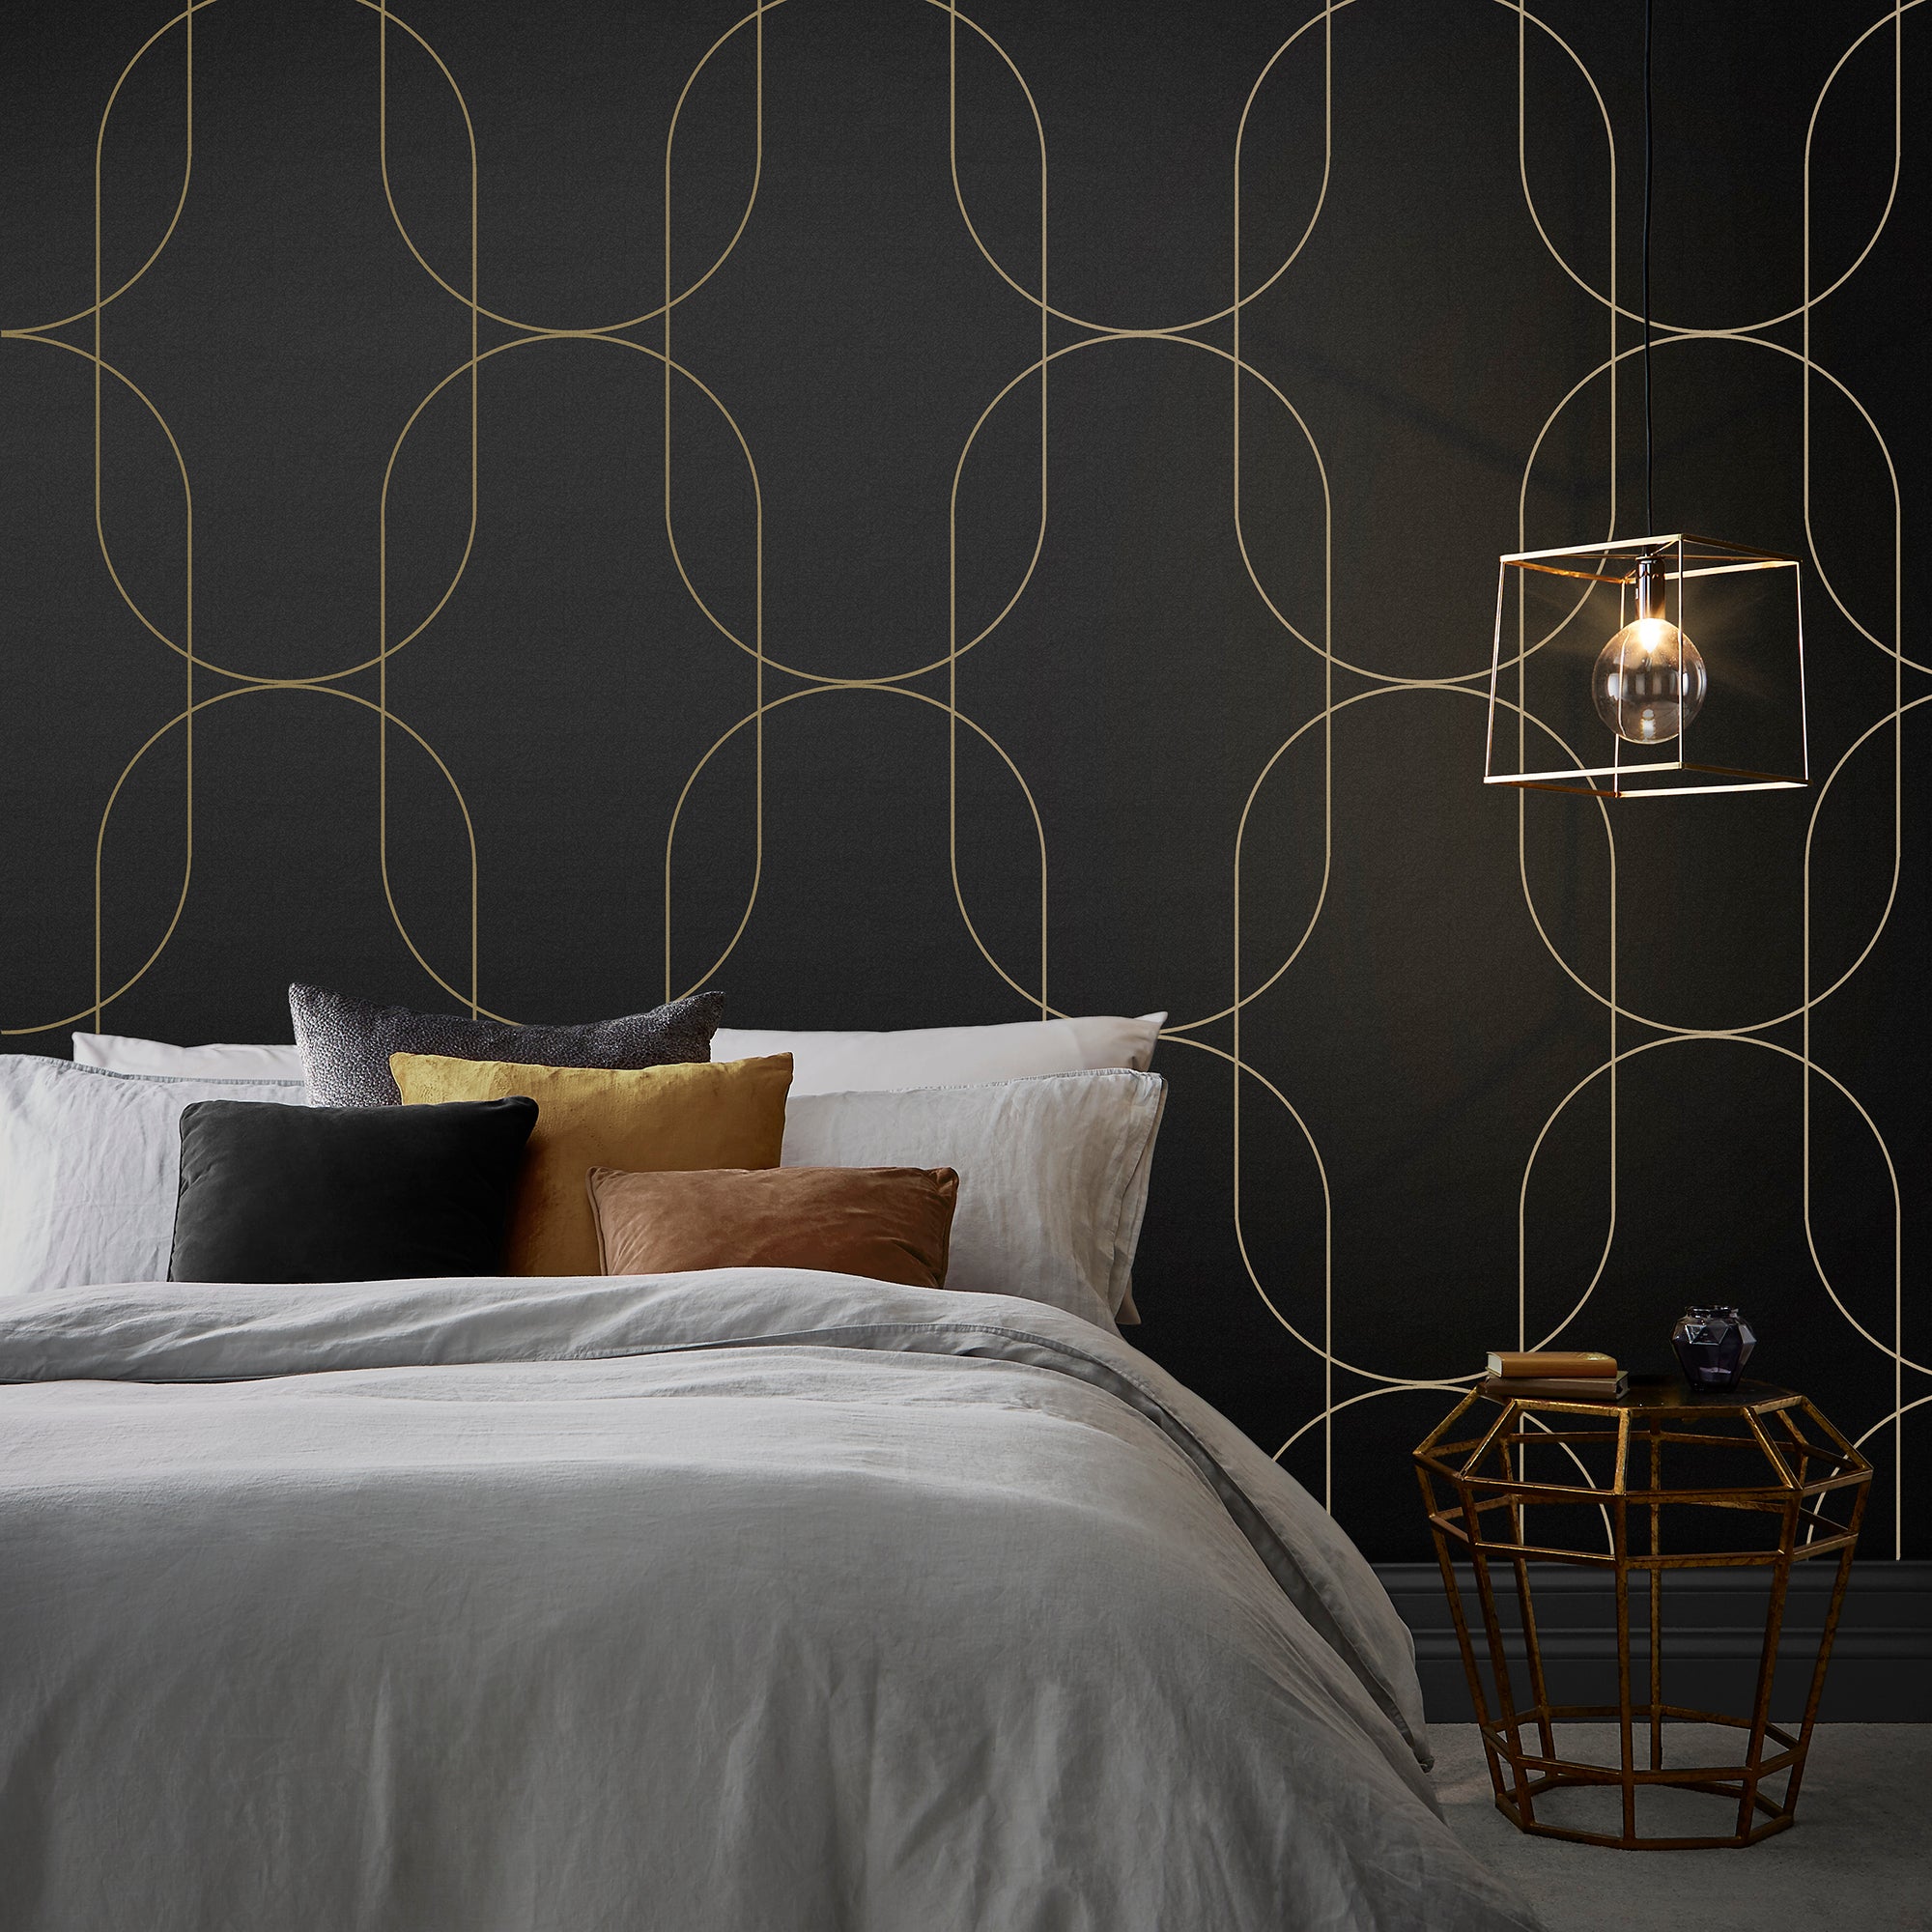 The Inspire Decor Wallpaper for Wall Removable Wallpaper Vinyl Wallpaper  Self Adhesive Wallpaper Wall décor Code235 Black  Gold Geometric Wallpaper   W 24 X H 124 inches 2066 Sqft   Amazonin Home Improvement